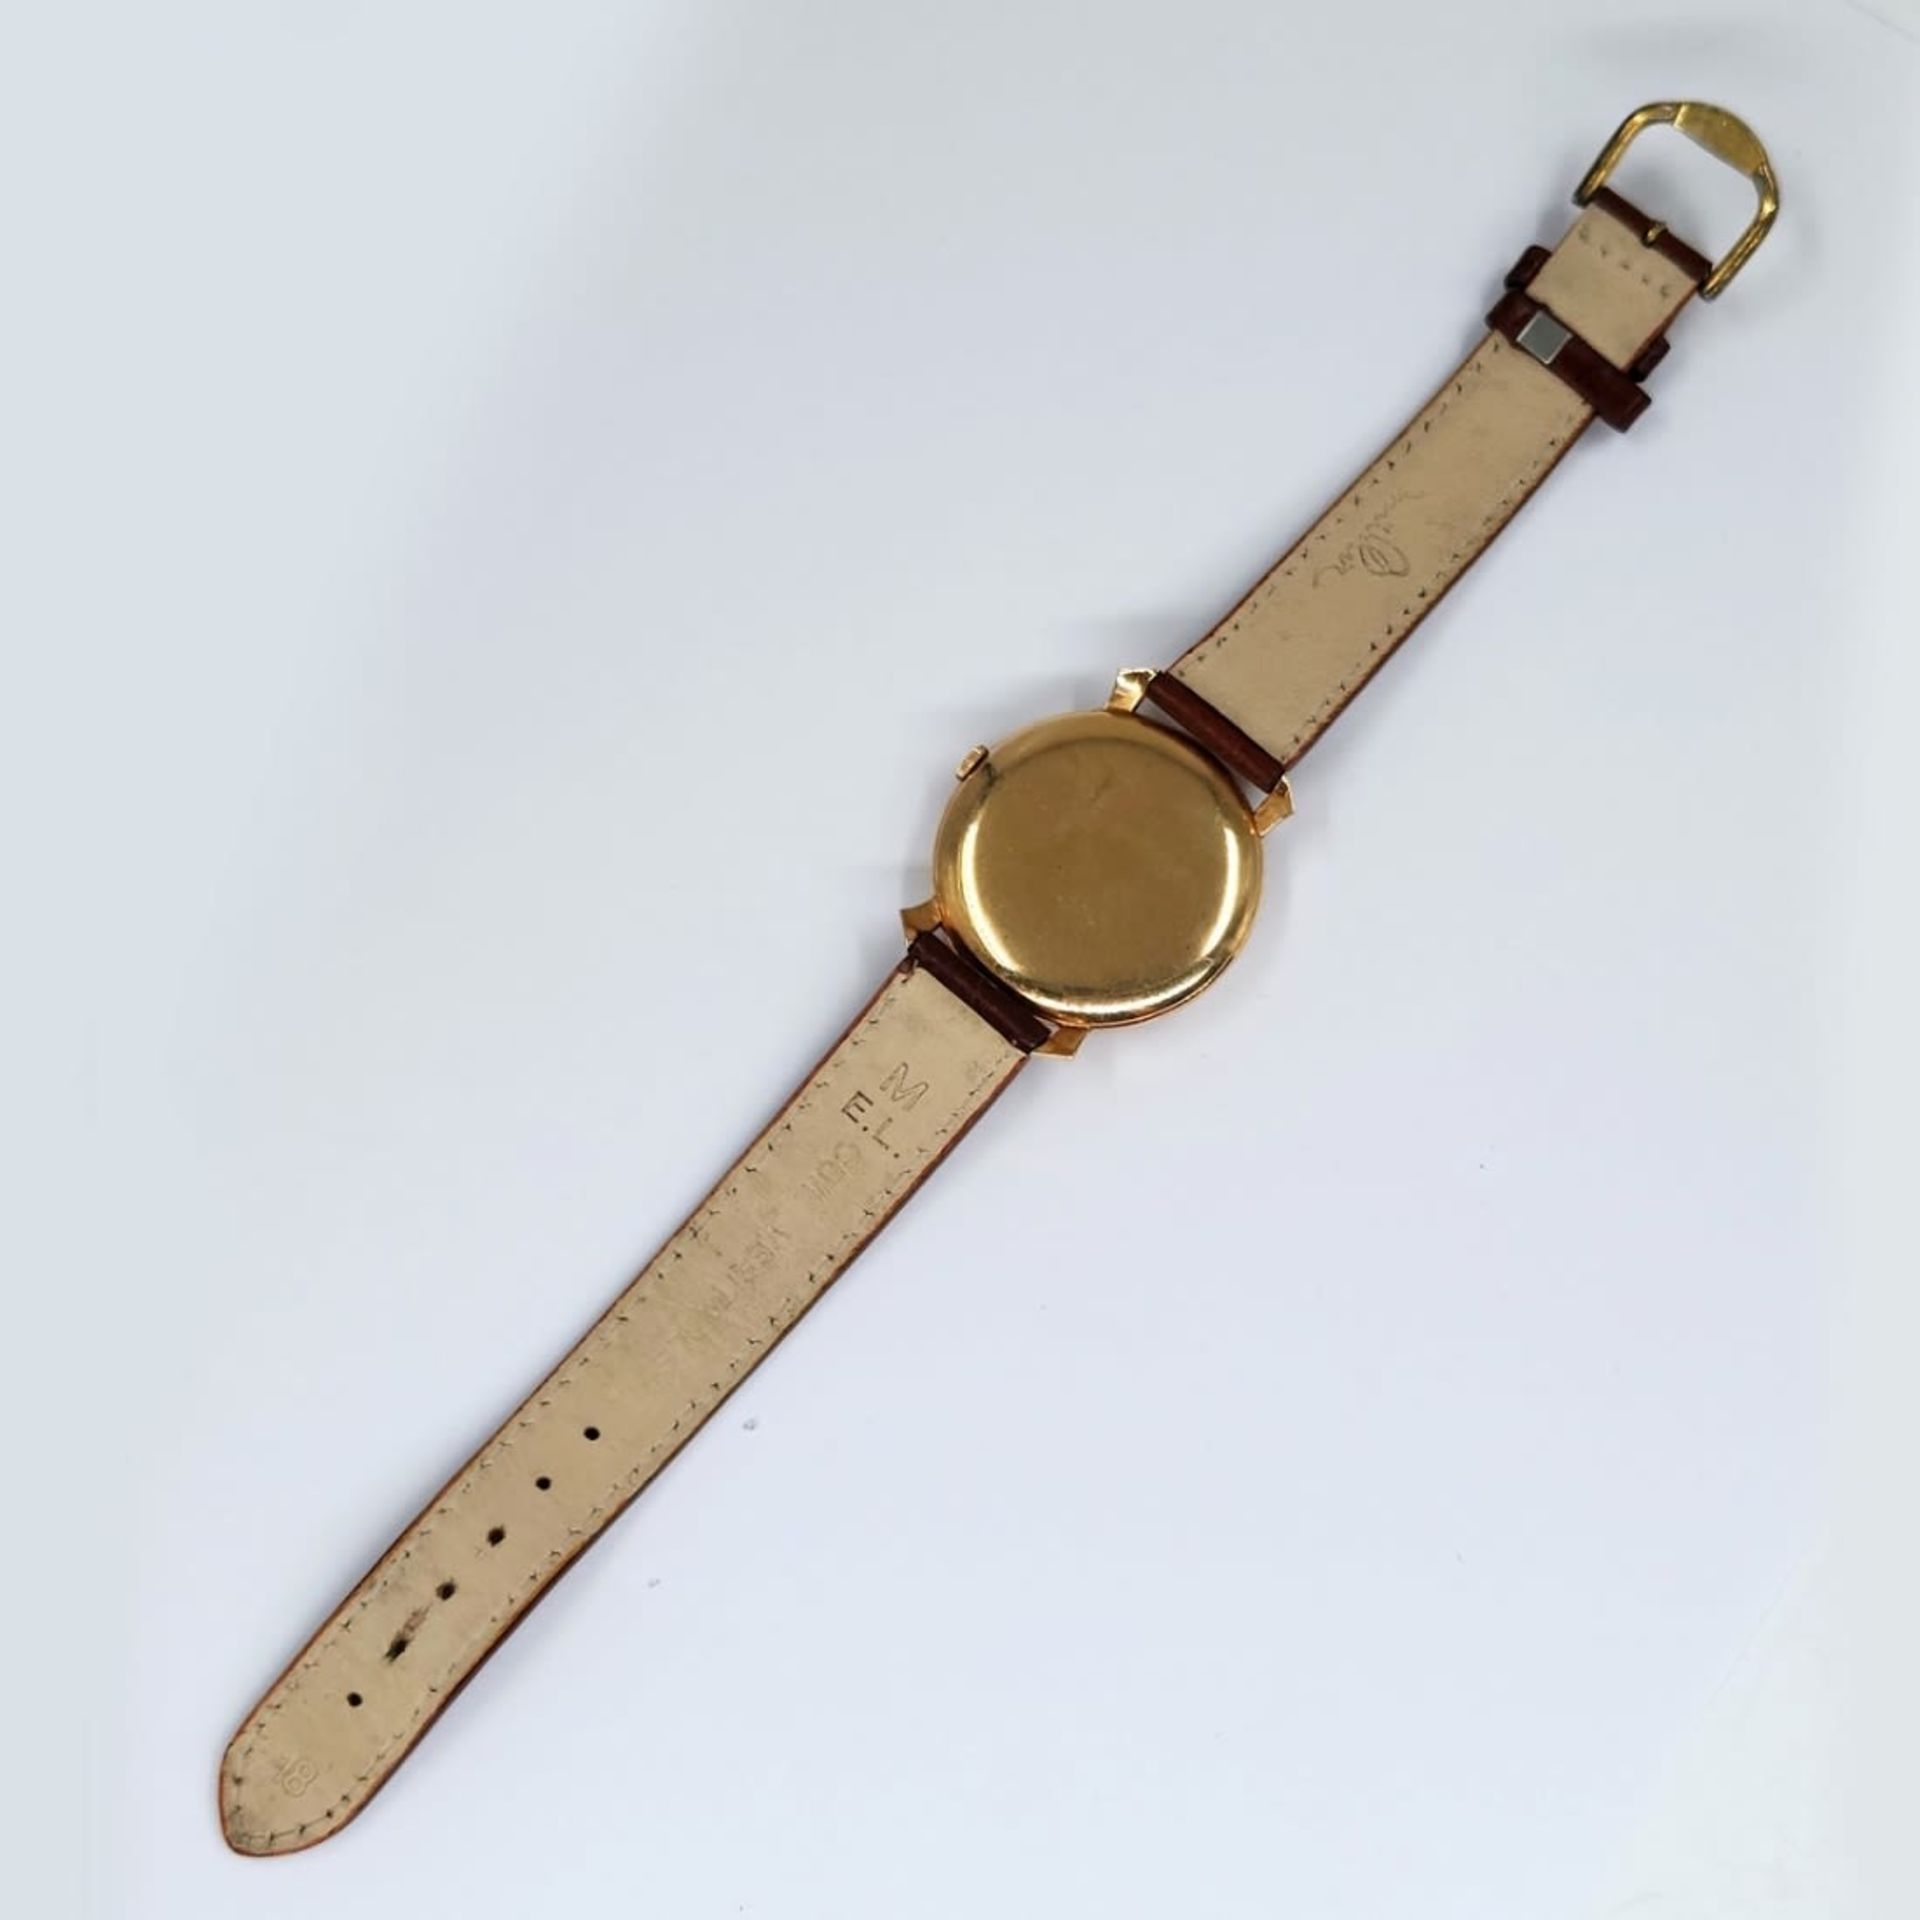 Wristwatch for men made by: 'Schaffhausen', 14k yellow gold, brown leather strap, working - Image 4 of 4